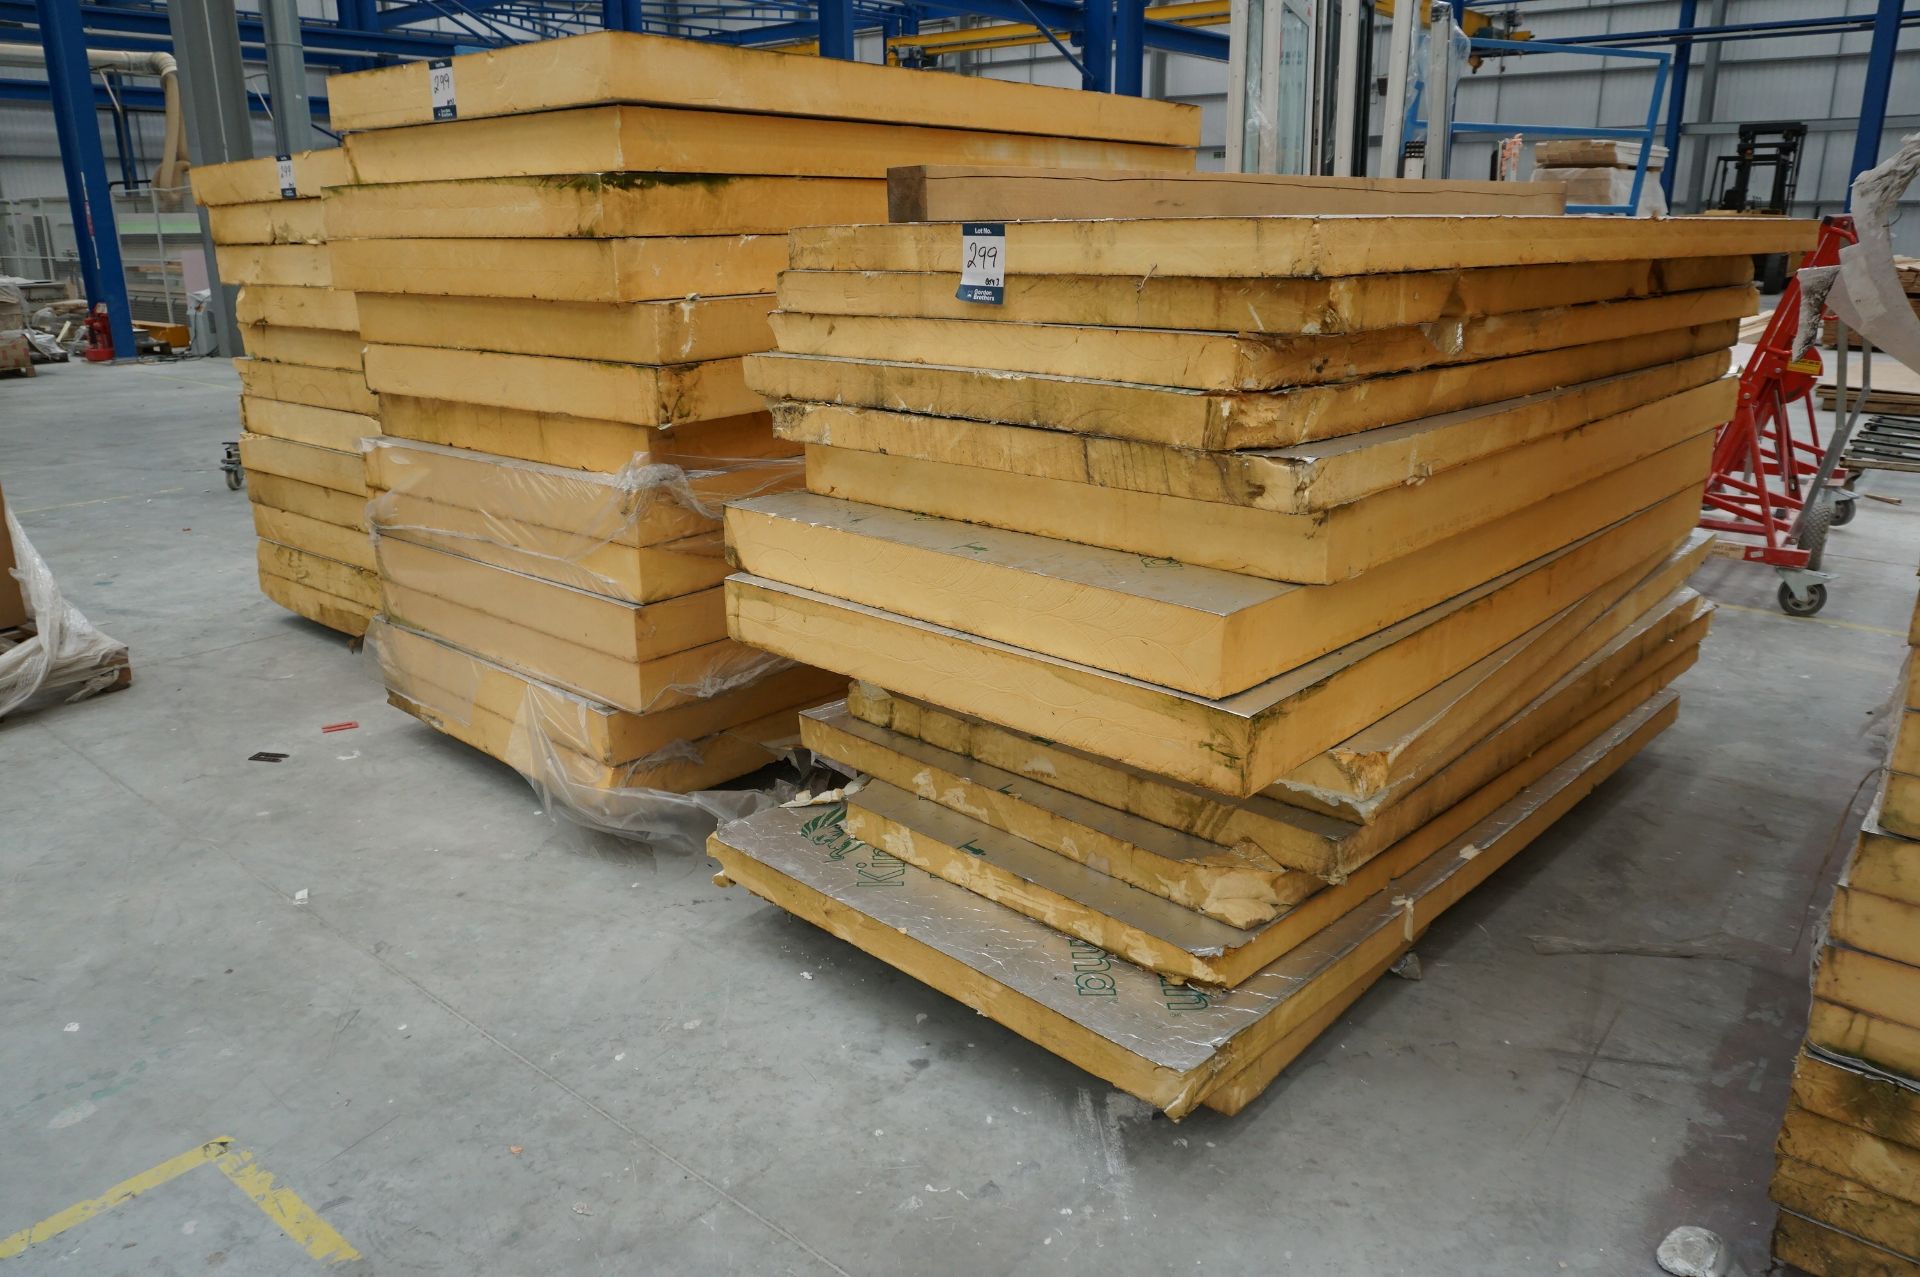 39x (no.) Kingspan, Therma TP10 insulation board, 3 mixed pallets, thickness 80 to 130mm, 1200 x - Image 2 of 5